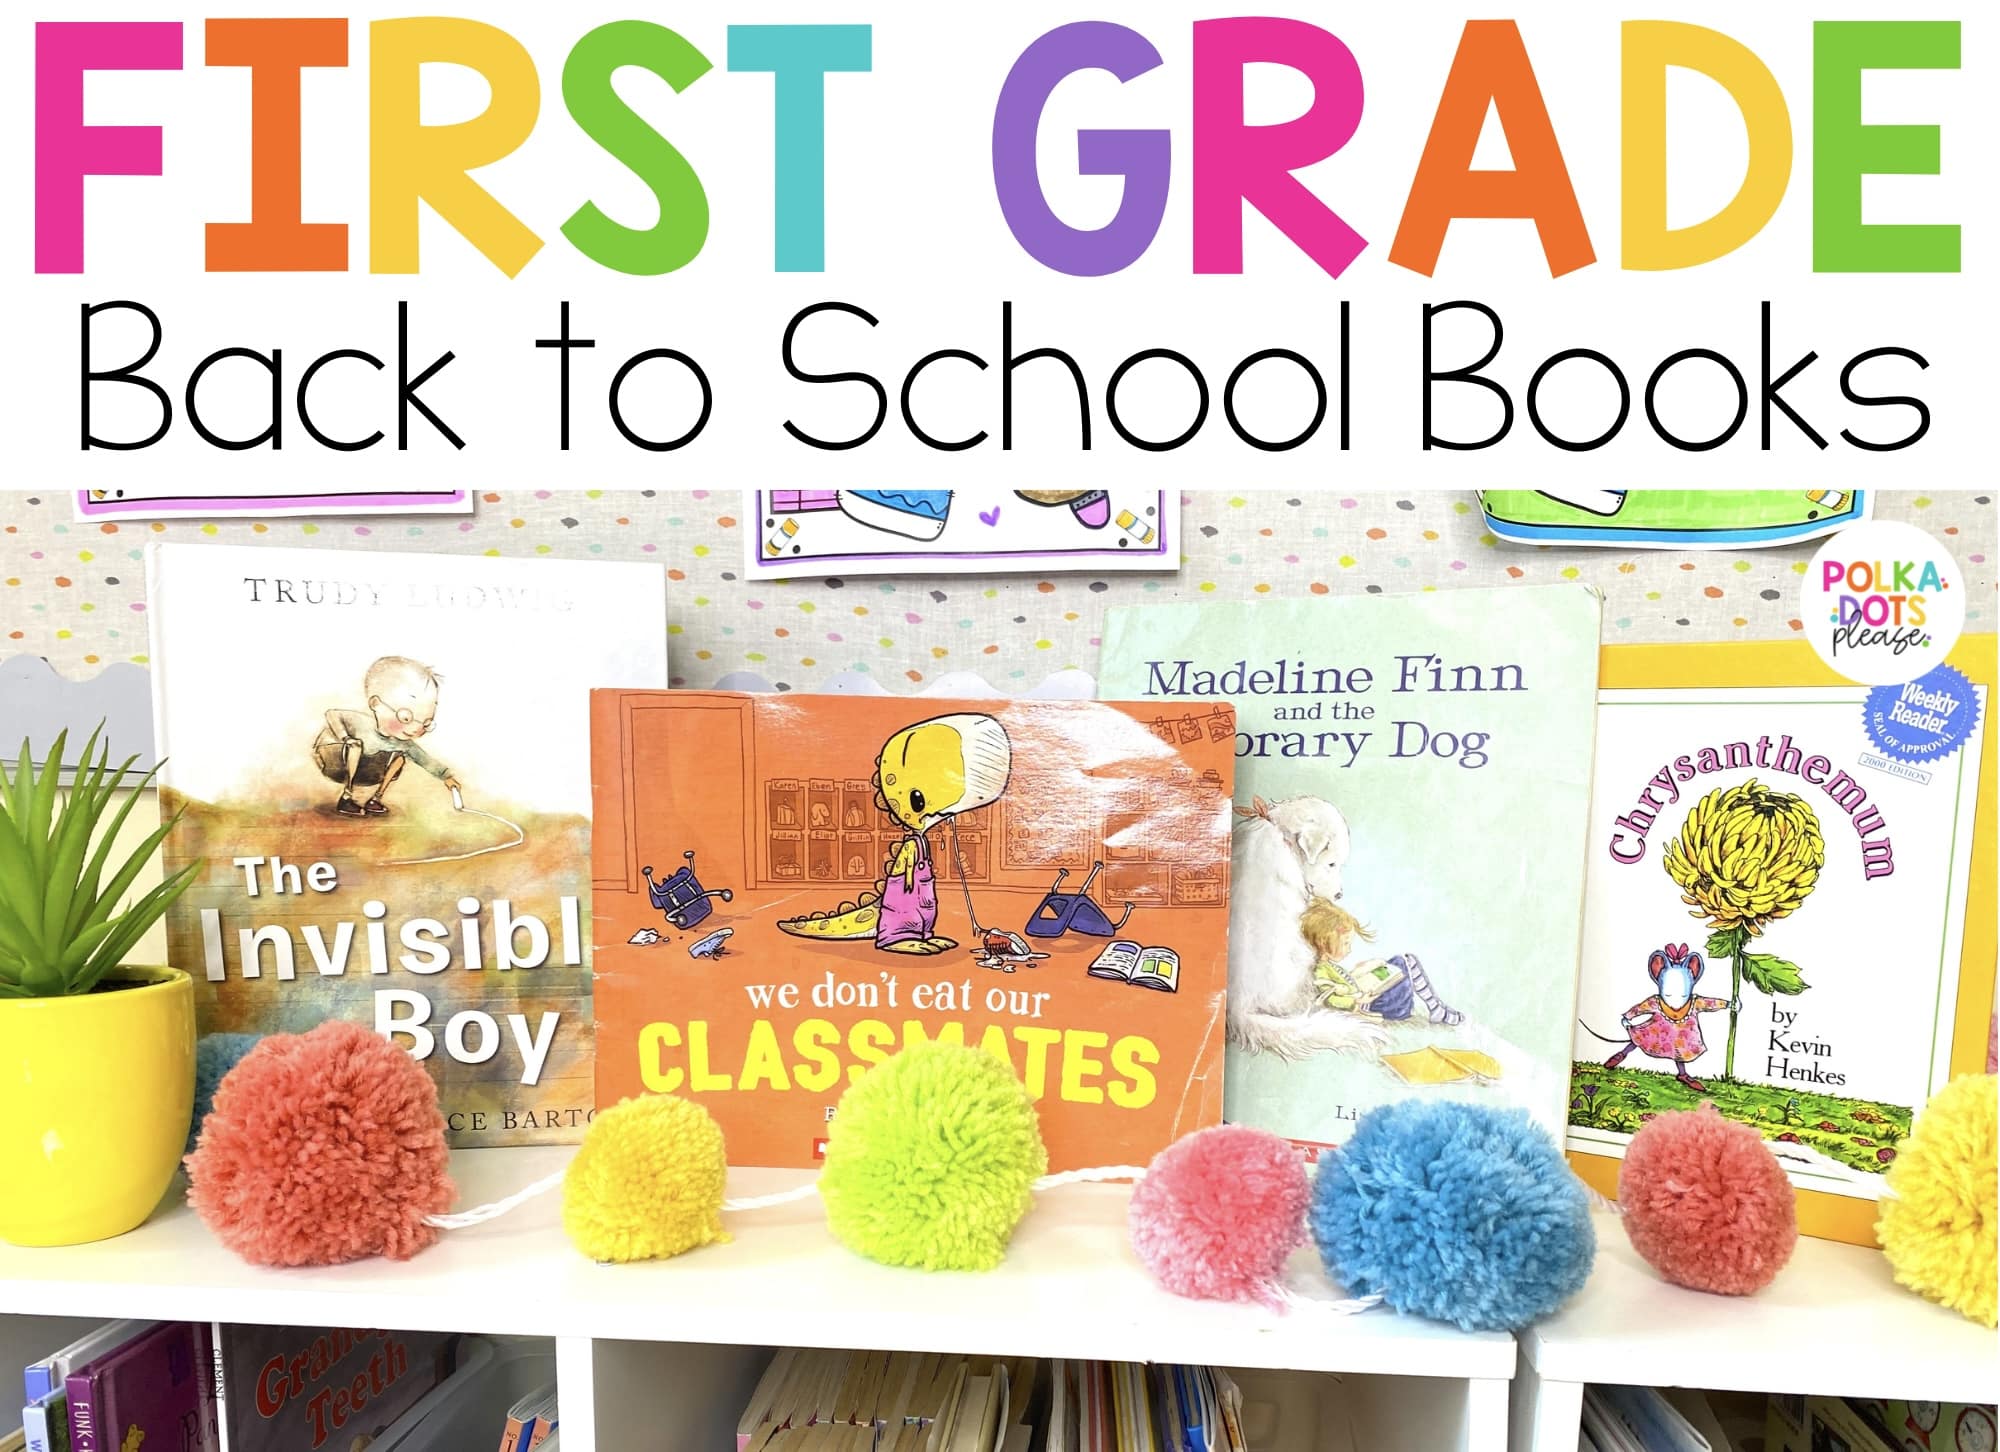 First Grade Back to School Books